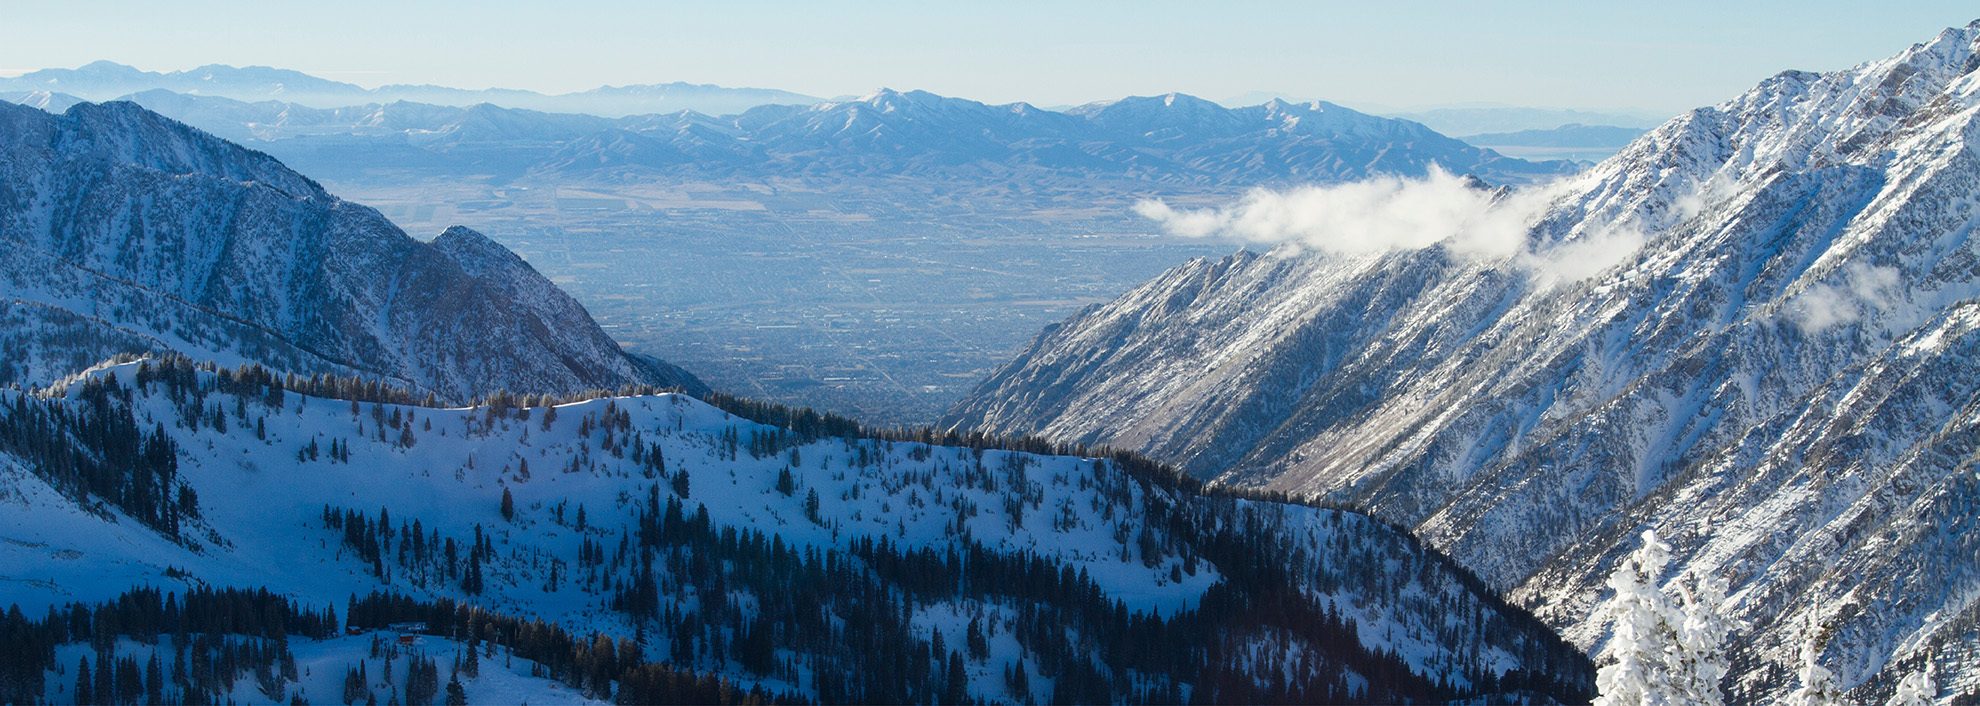 Wasatch Mountains in Winter